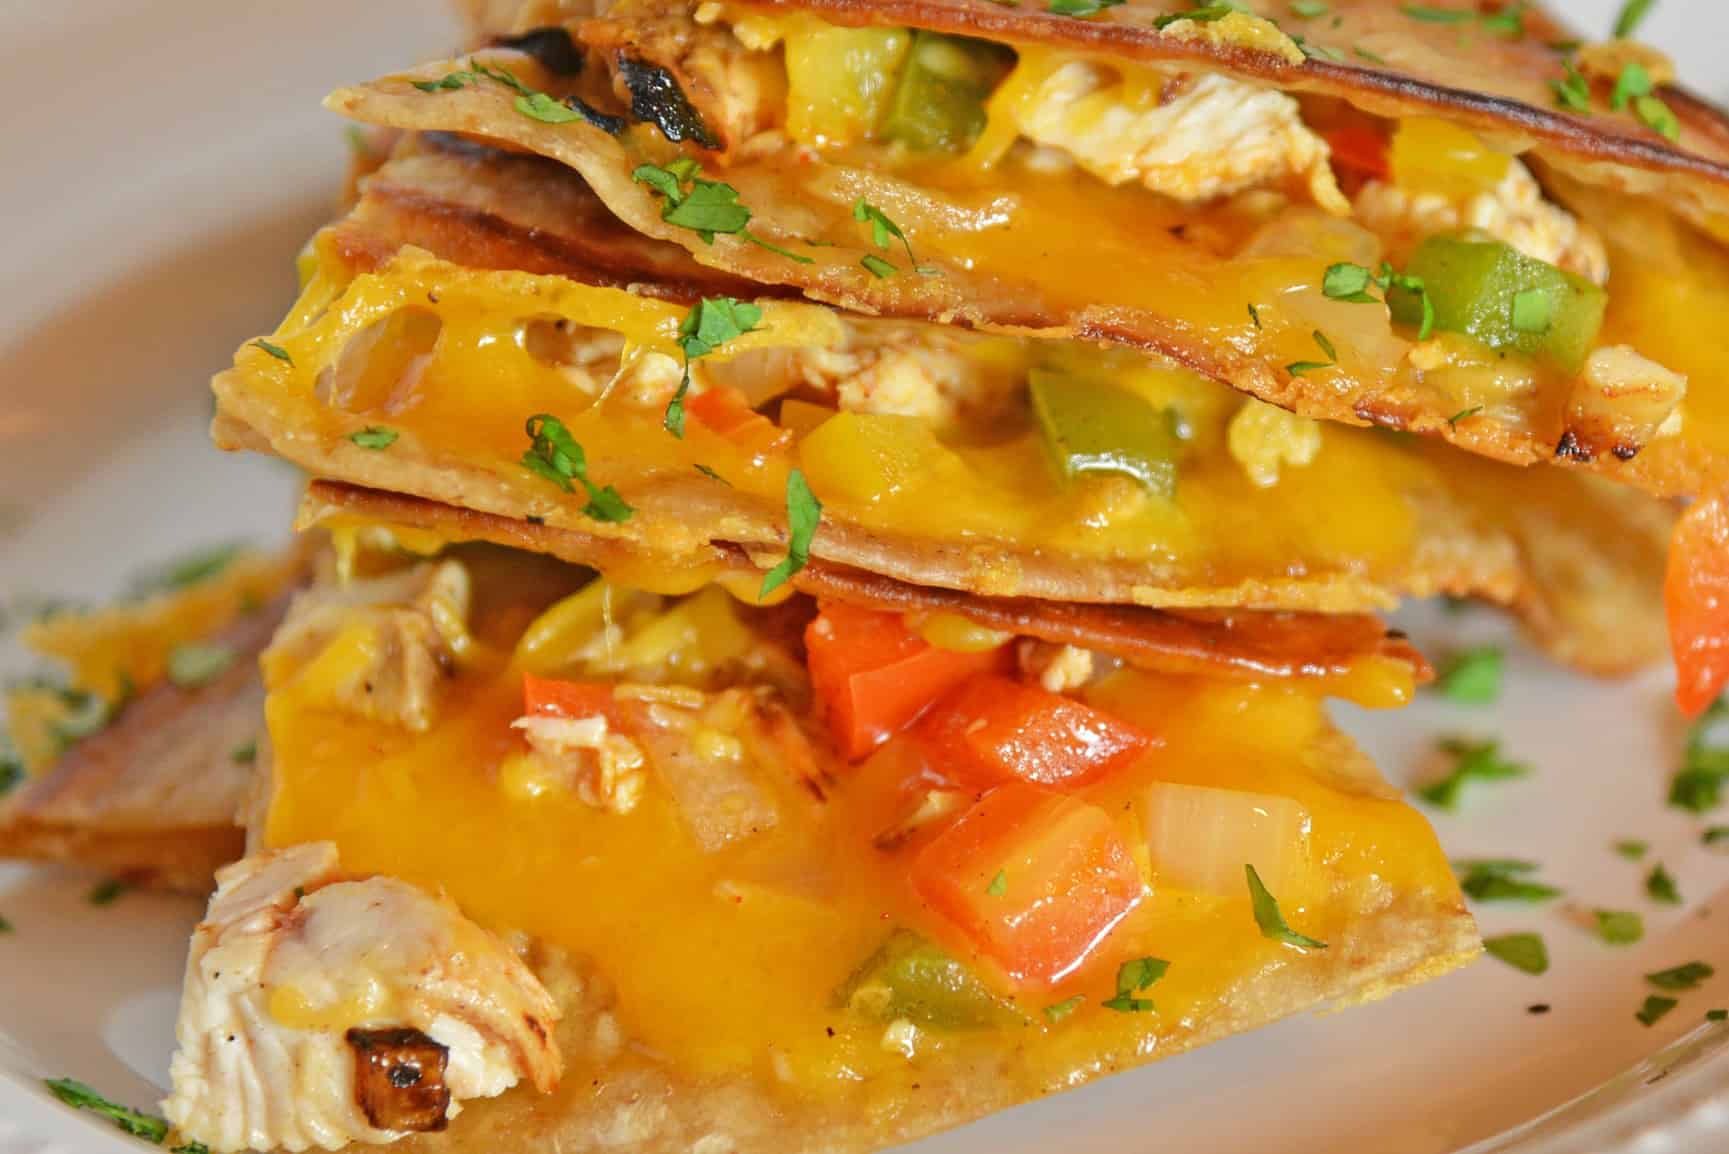 This Chicken Quesadillas Recipe is made with crispy tortillas, chopped vegetables and lots of cheese! This shows you how to make quesadillas the easy way! #chickenquesadillarecipe #howtomakechickenquesadillas www.savoryexperiments.com